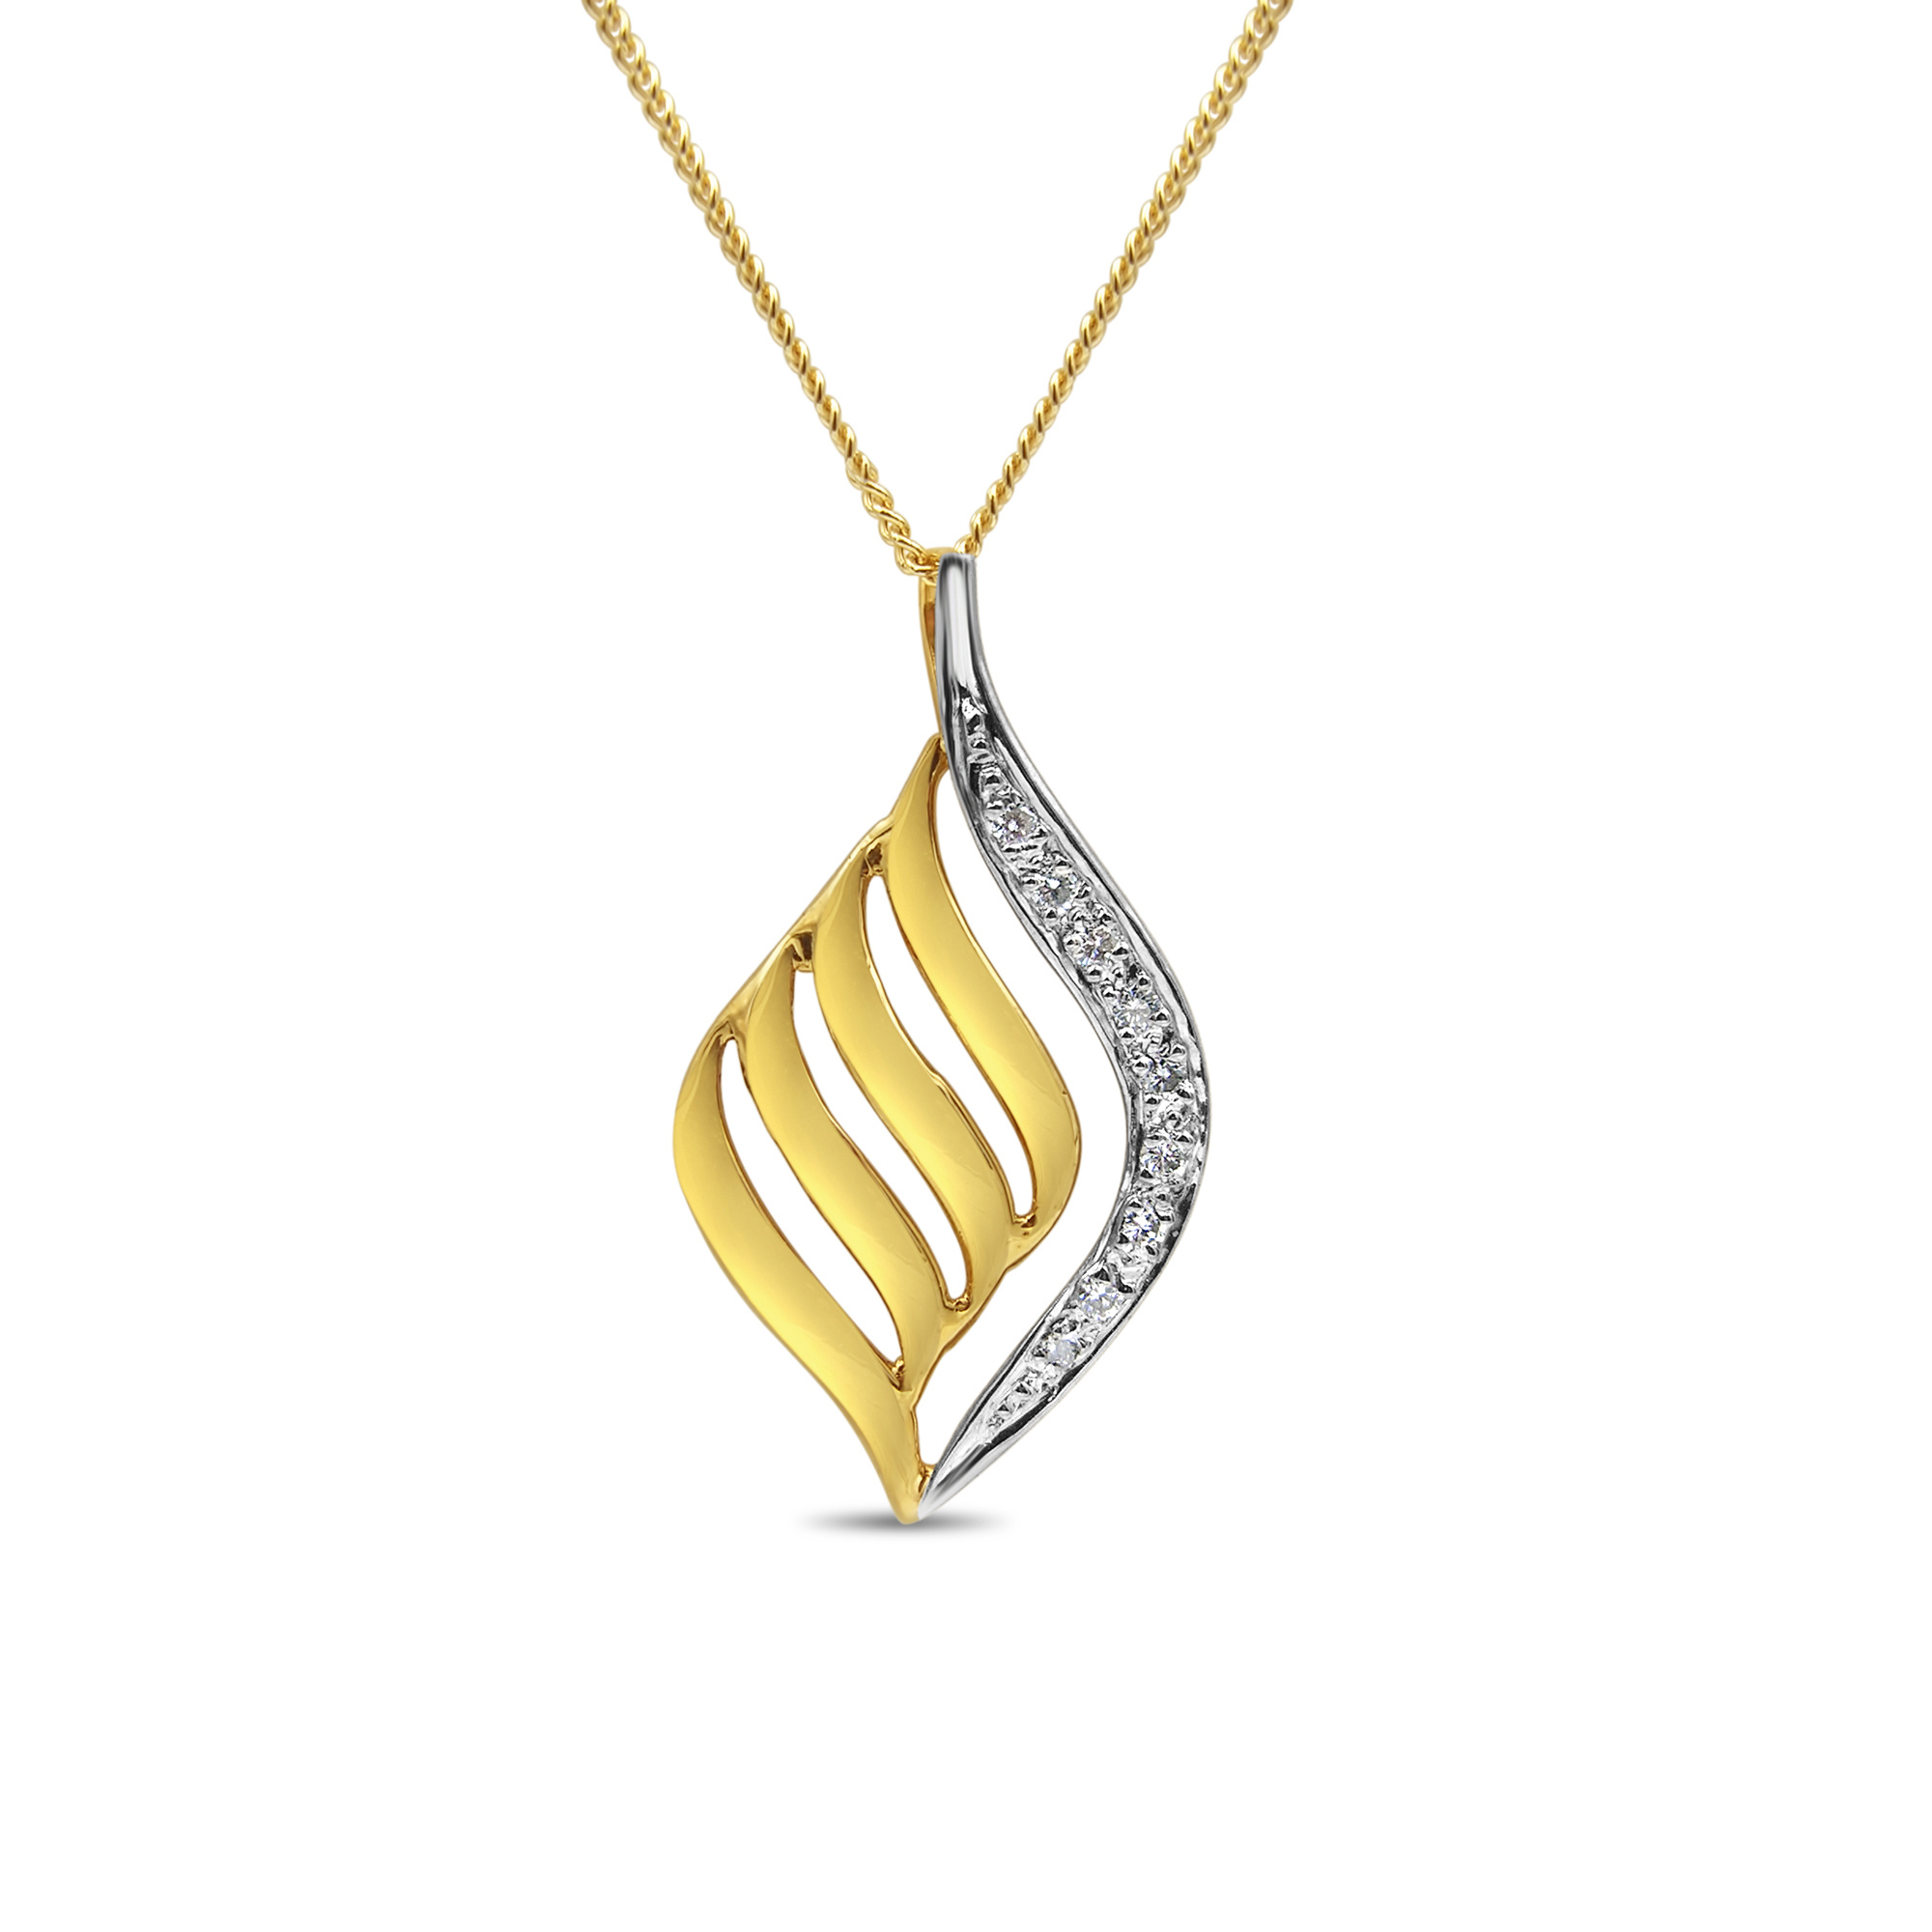 18kt yellow & white gold pendant with 0.05 ct diamonds